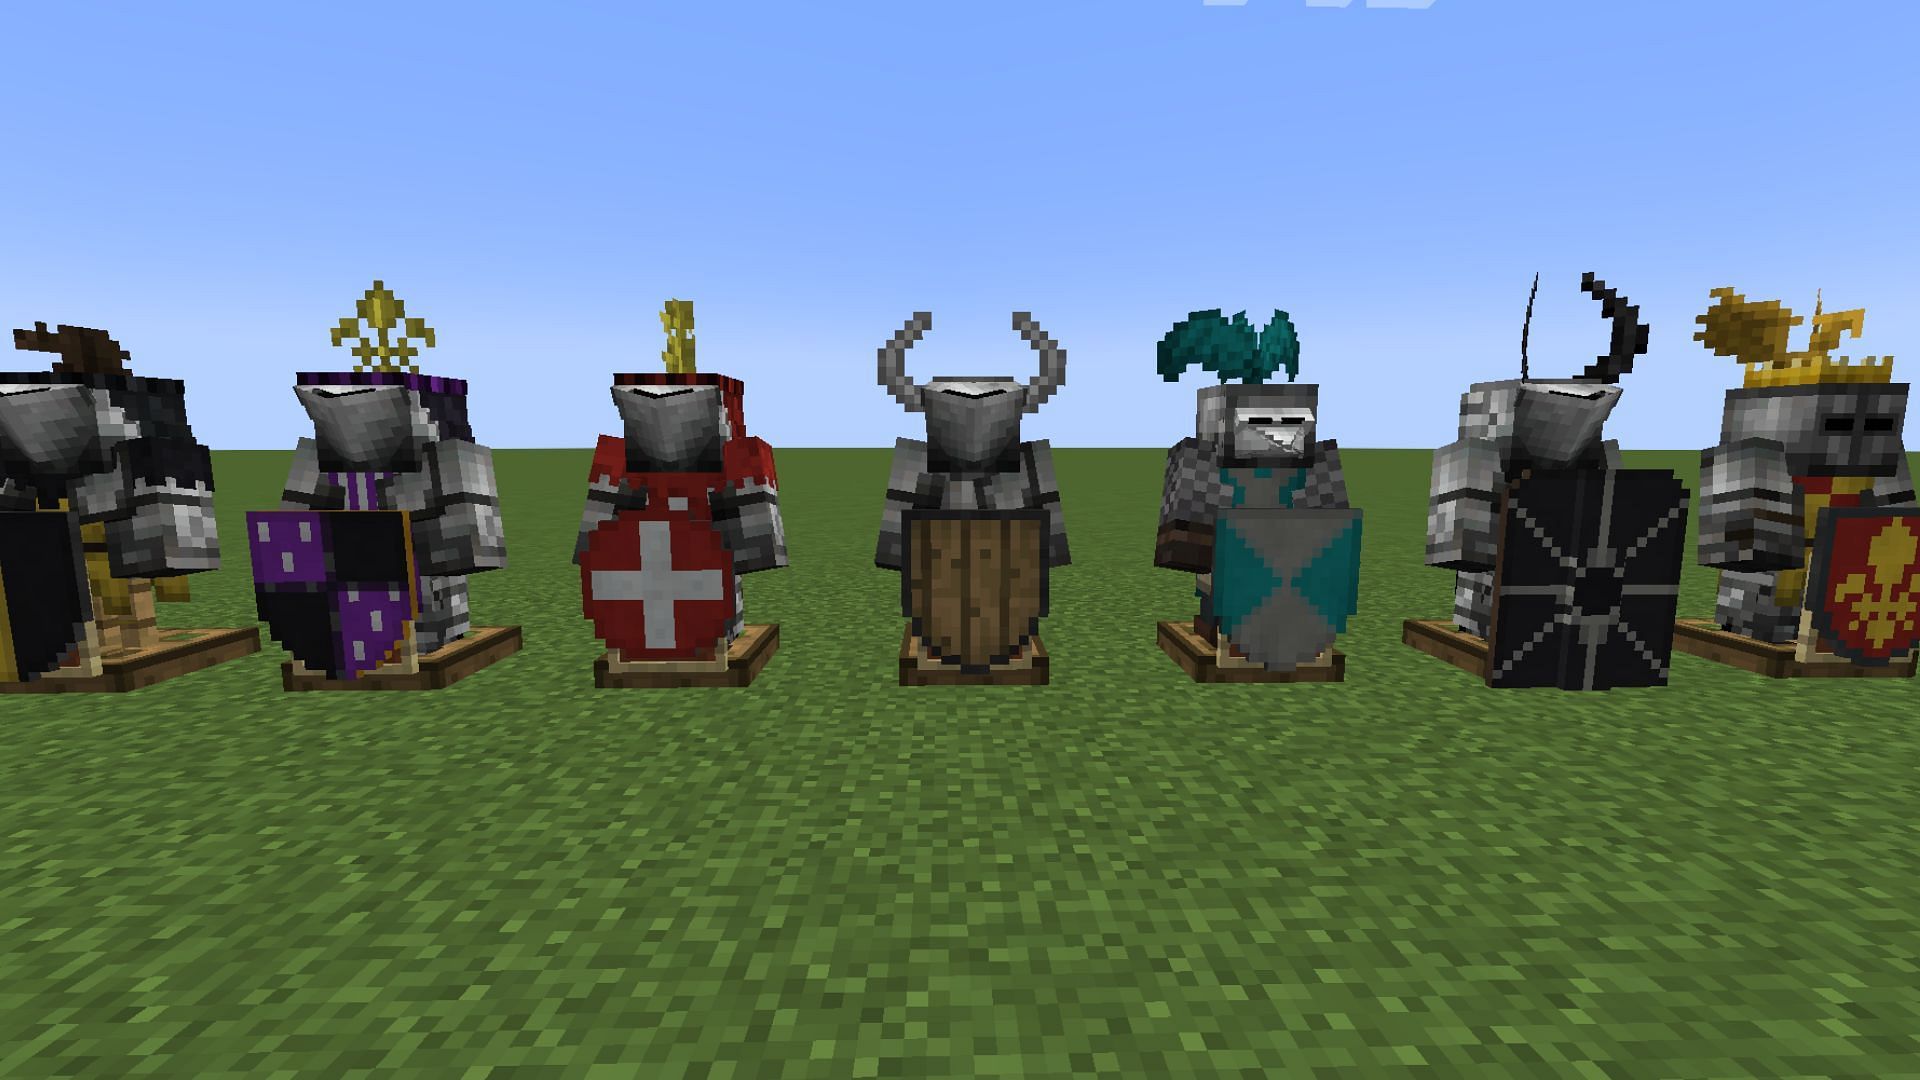 This mod not only adds new shields but also brings new weapons and armor parts to Minecraft. (Image via CurseForge)